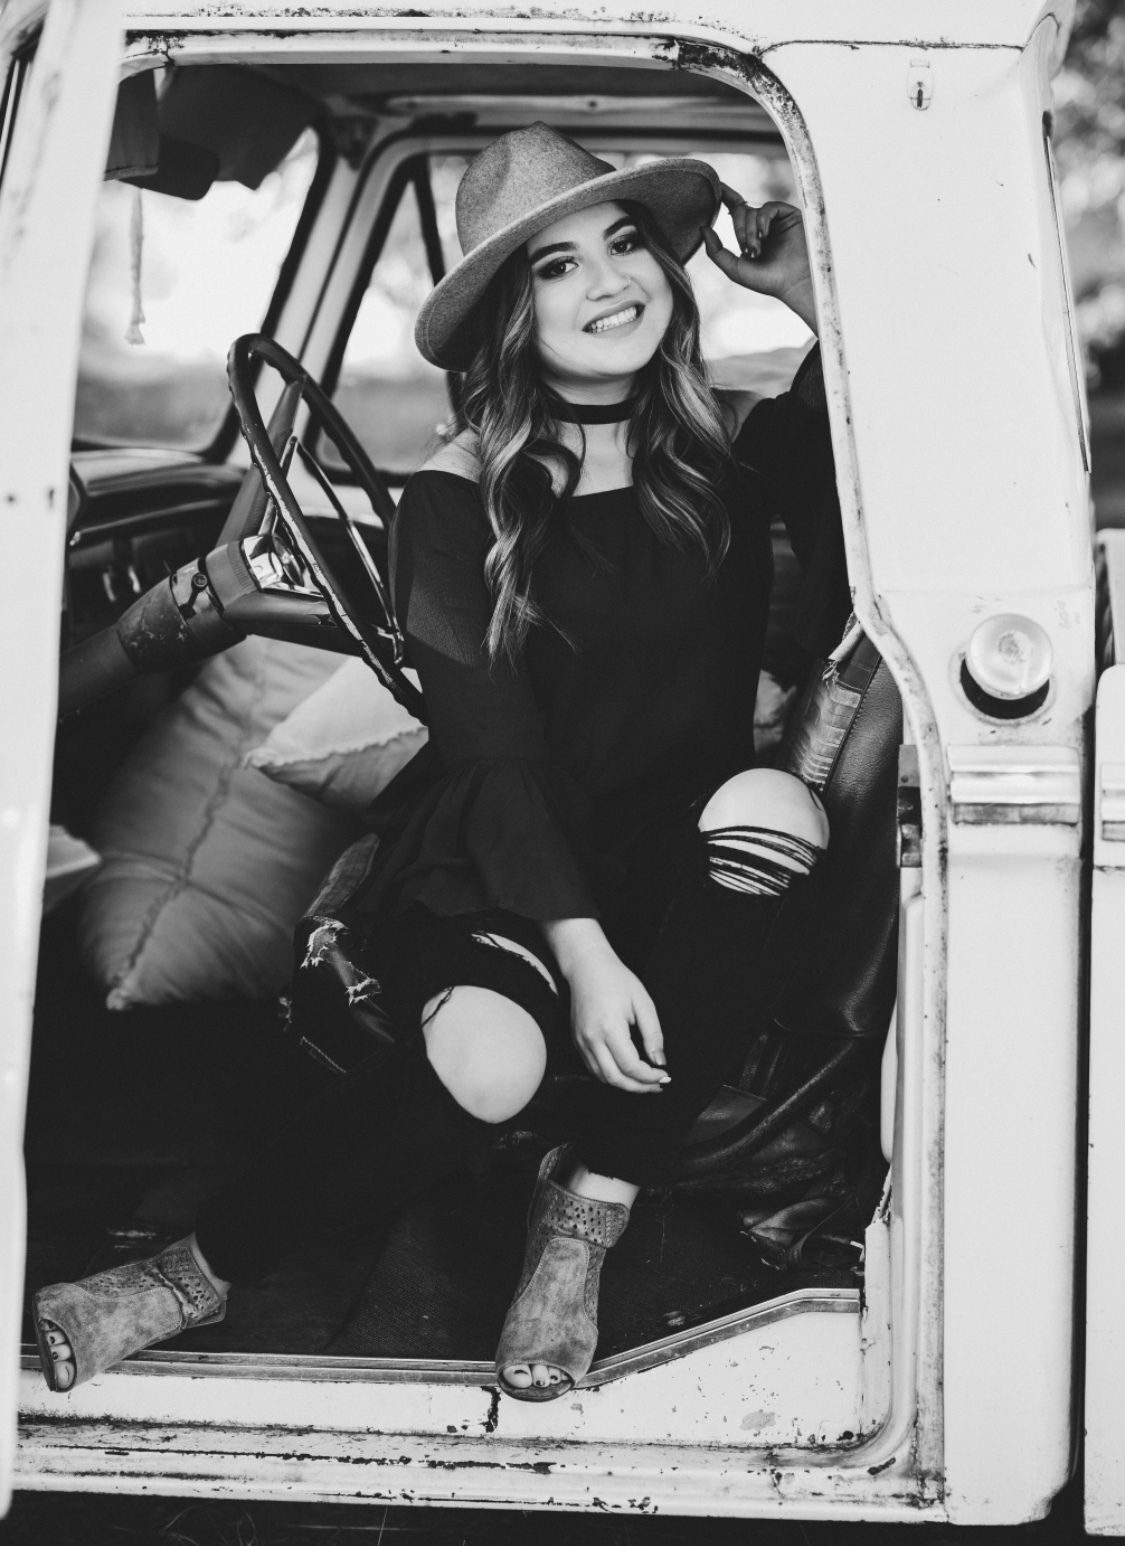 Black and white photo shows a young woman smiling from inside the front seat of what looks like the front of an old truck. She is wearing a wide-brimmed hat, choker, and dark top and pants with open toed boots. 